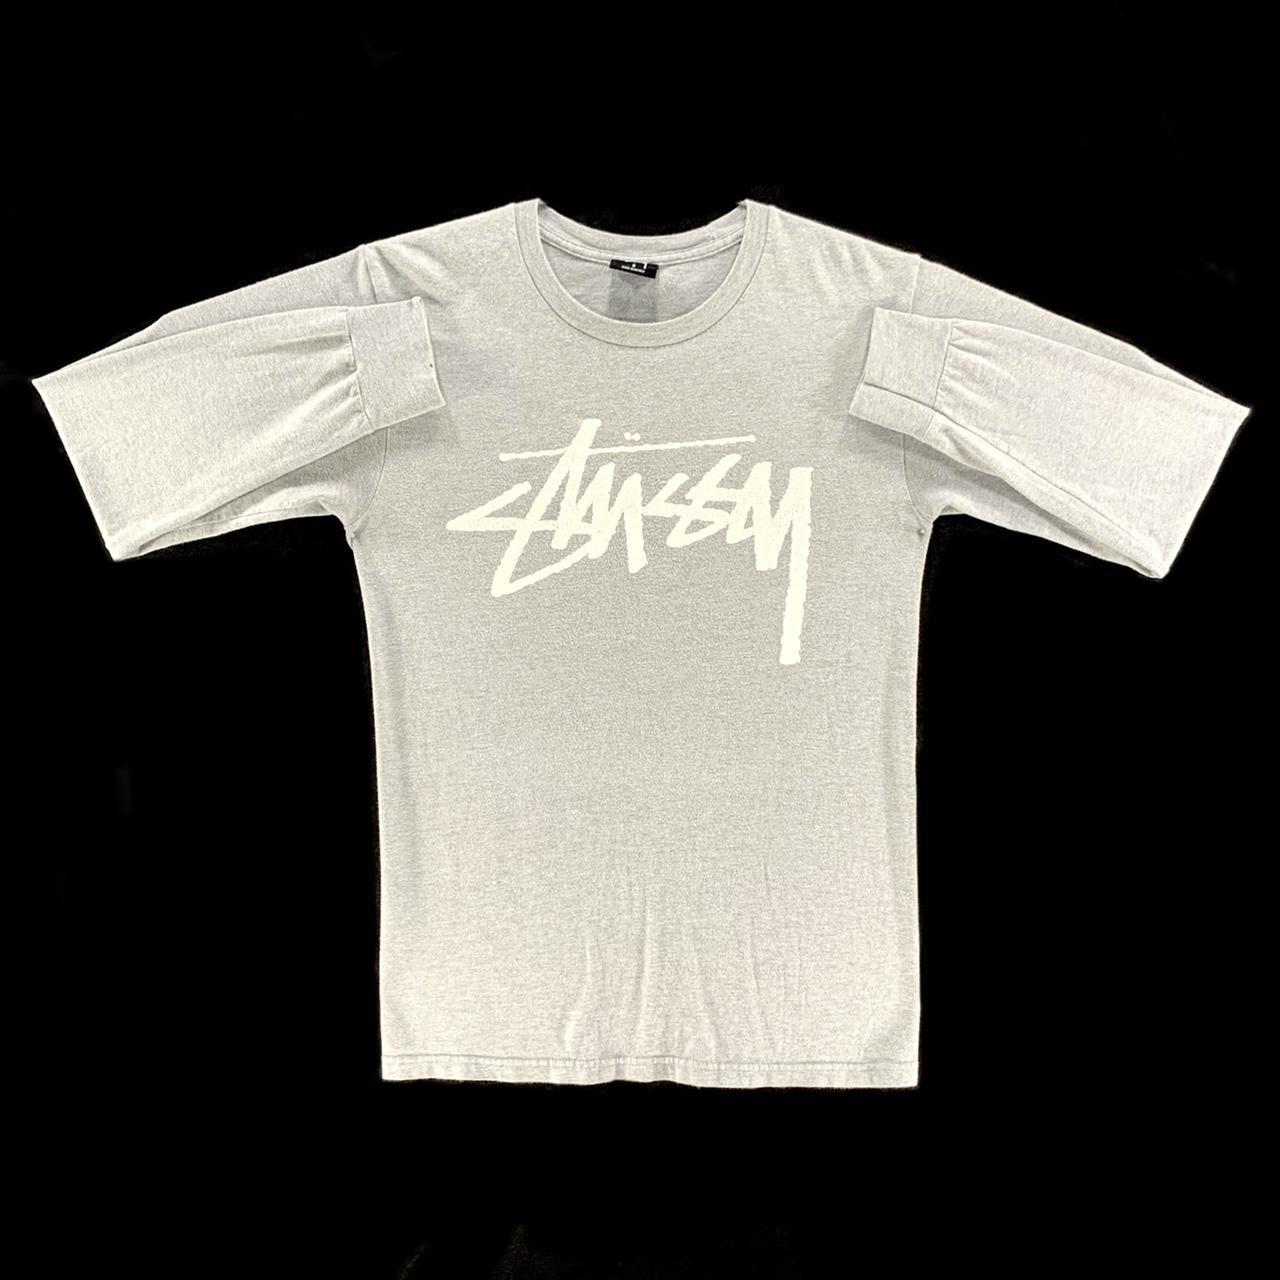 Vintage made in Mexico Stussy sports grey long... Depop